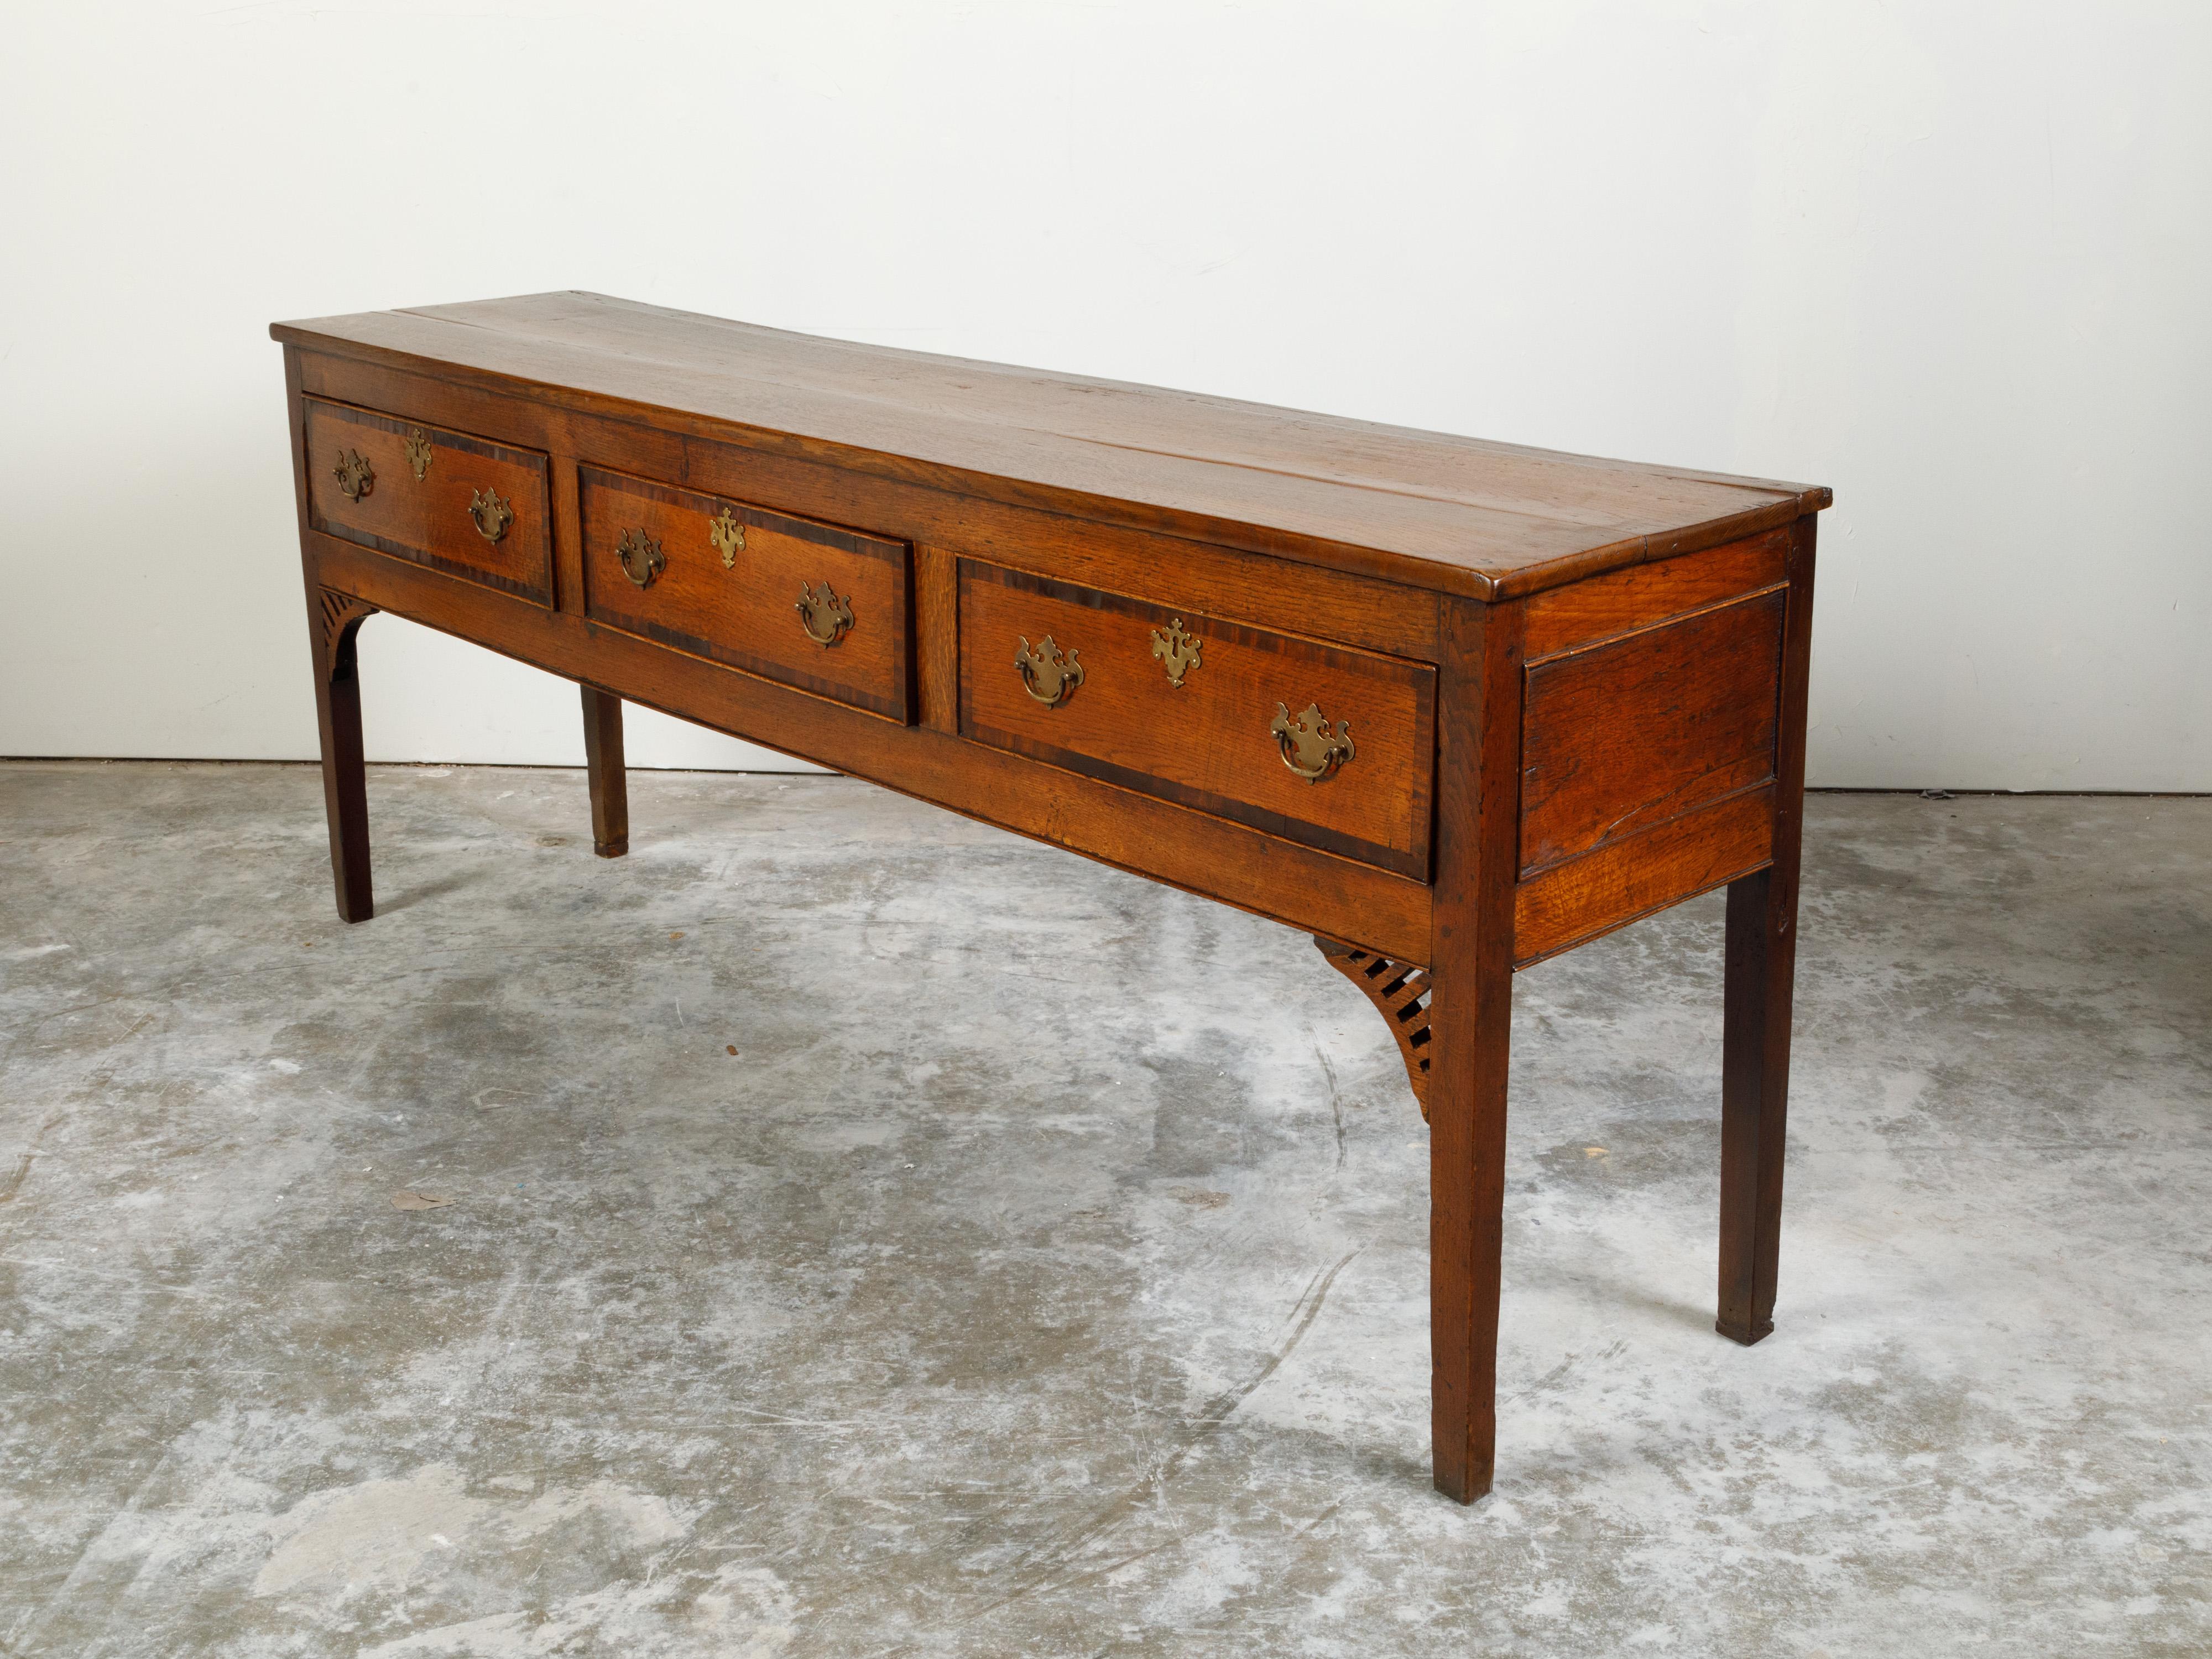 An English Georgian period oak sideboard from the early 19th century, with three drawers, banding and brass Chippendale style hardware. Created in England during the first quarter of the 19th century, this oak sideboard features a rectangular top